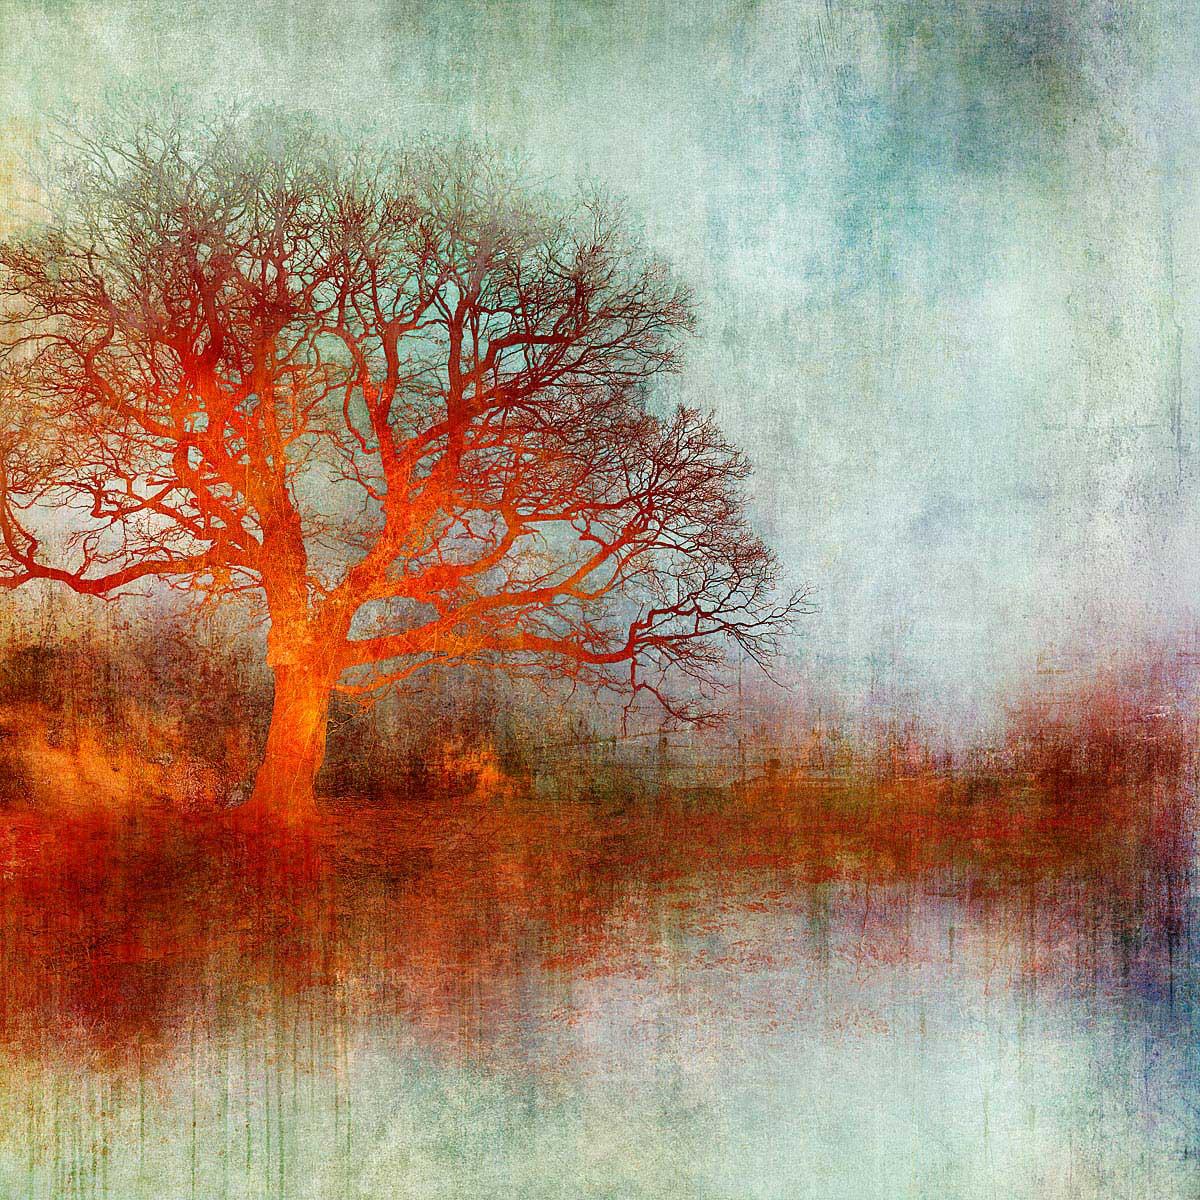 First Light - Colourful, Bright, Atmospheric, Tree, Nature, Digital Art - Contemporary Mixed Media Art by Mark Munroe Preston